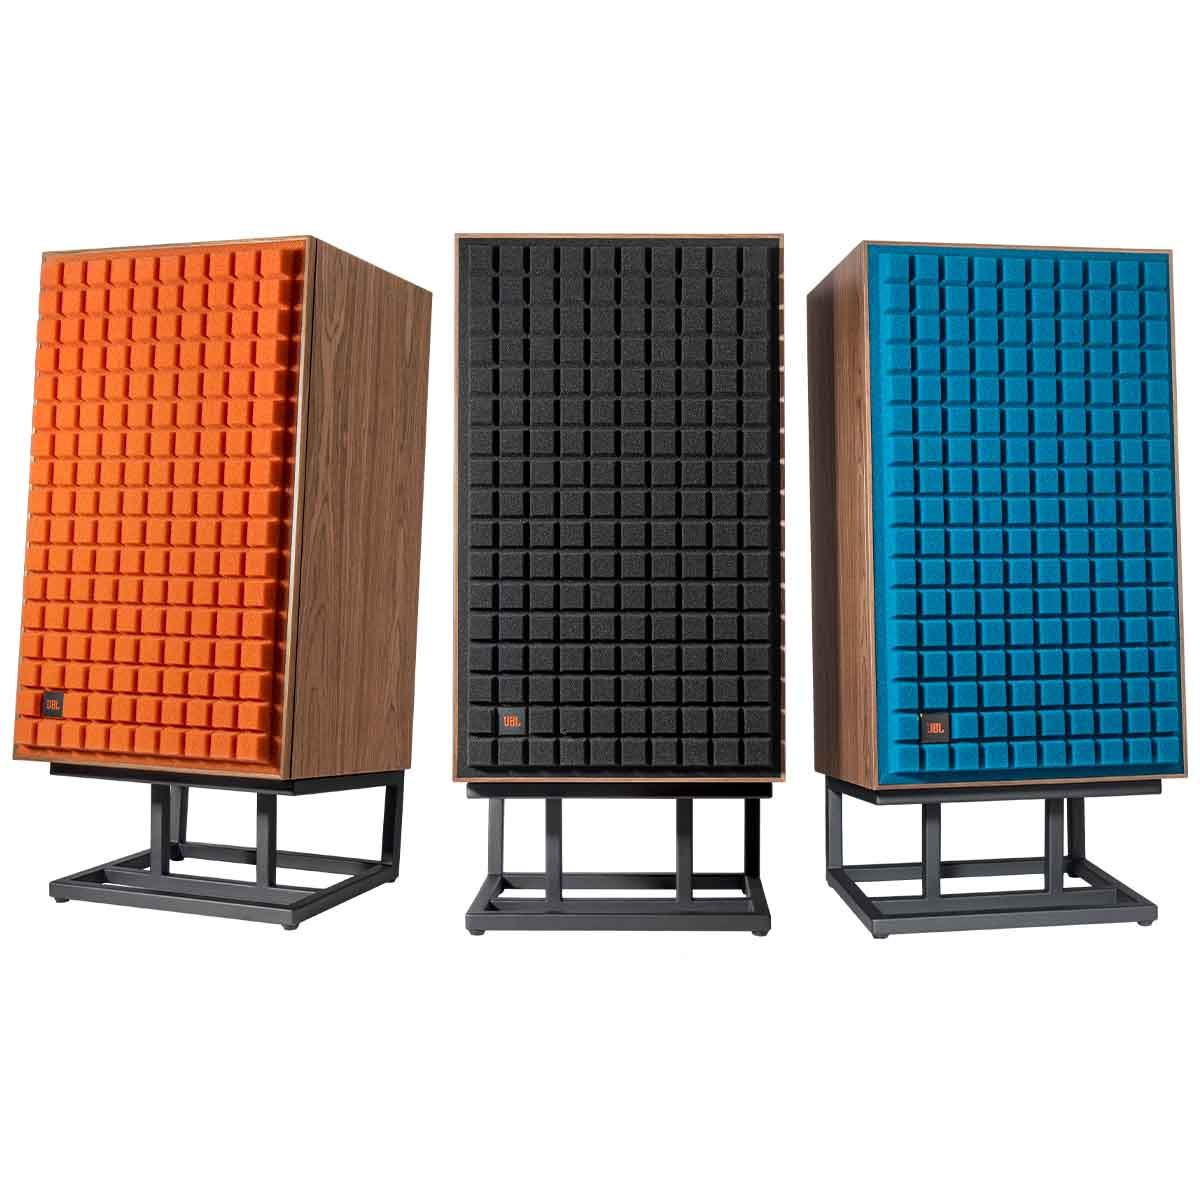 JBL L100 Classic MKII Loudspeaker front view of all colorways on stands